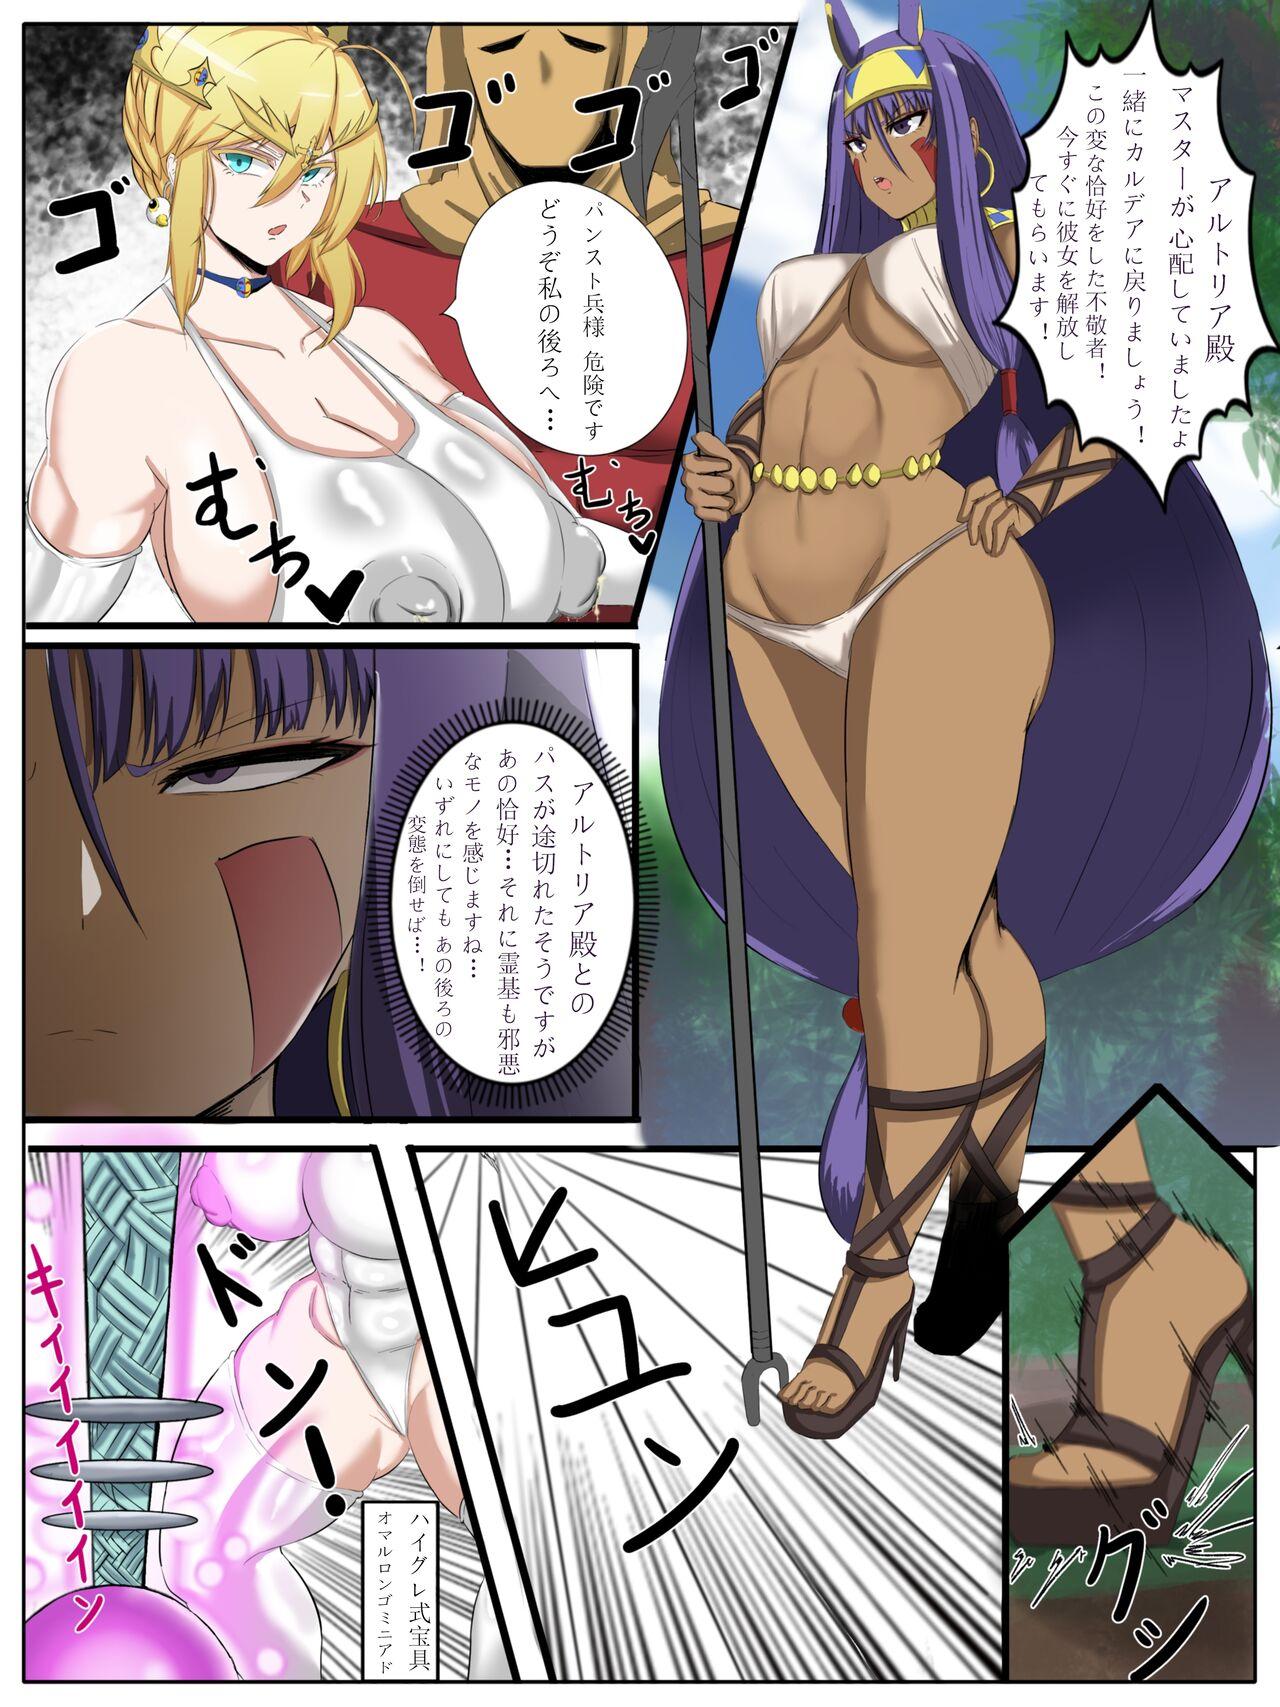 Boys 特異点 HーA.D.？？？？ー外界侵攻勢力ハイグレ！ - Fate grand order Tributo - Page 2